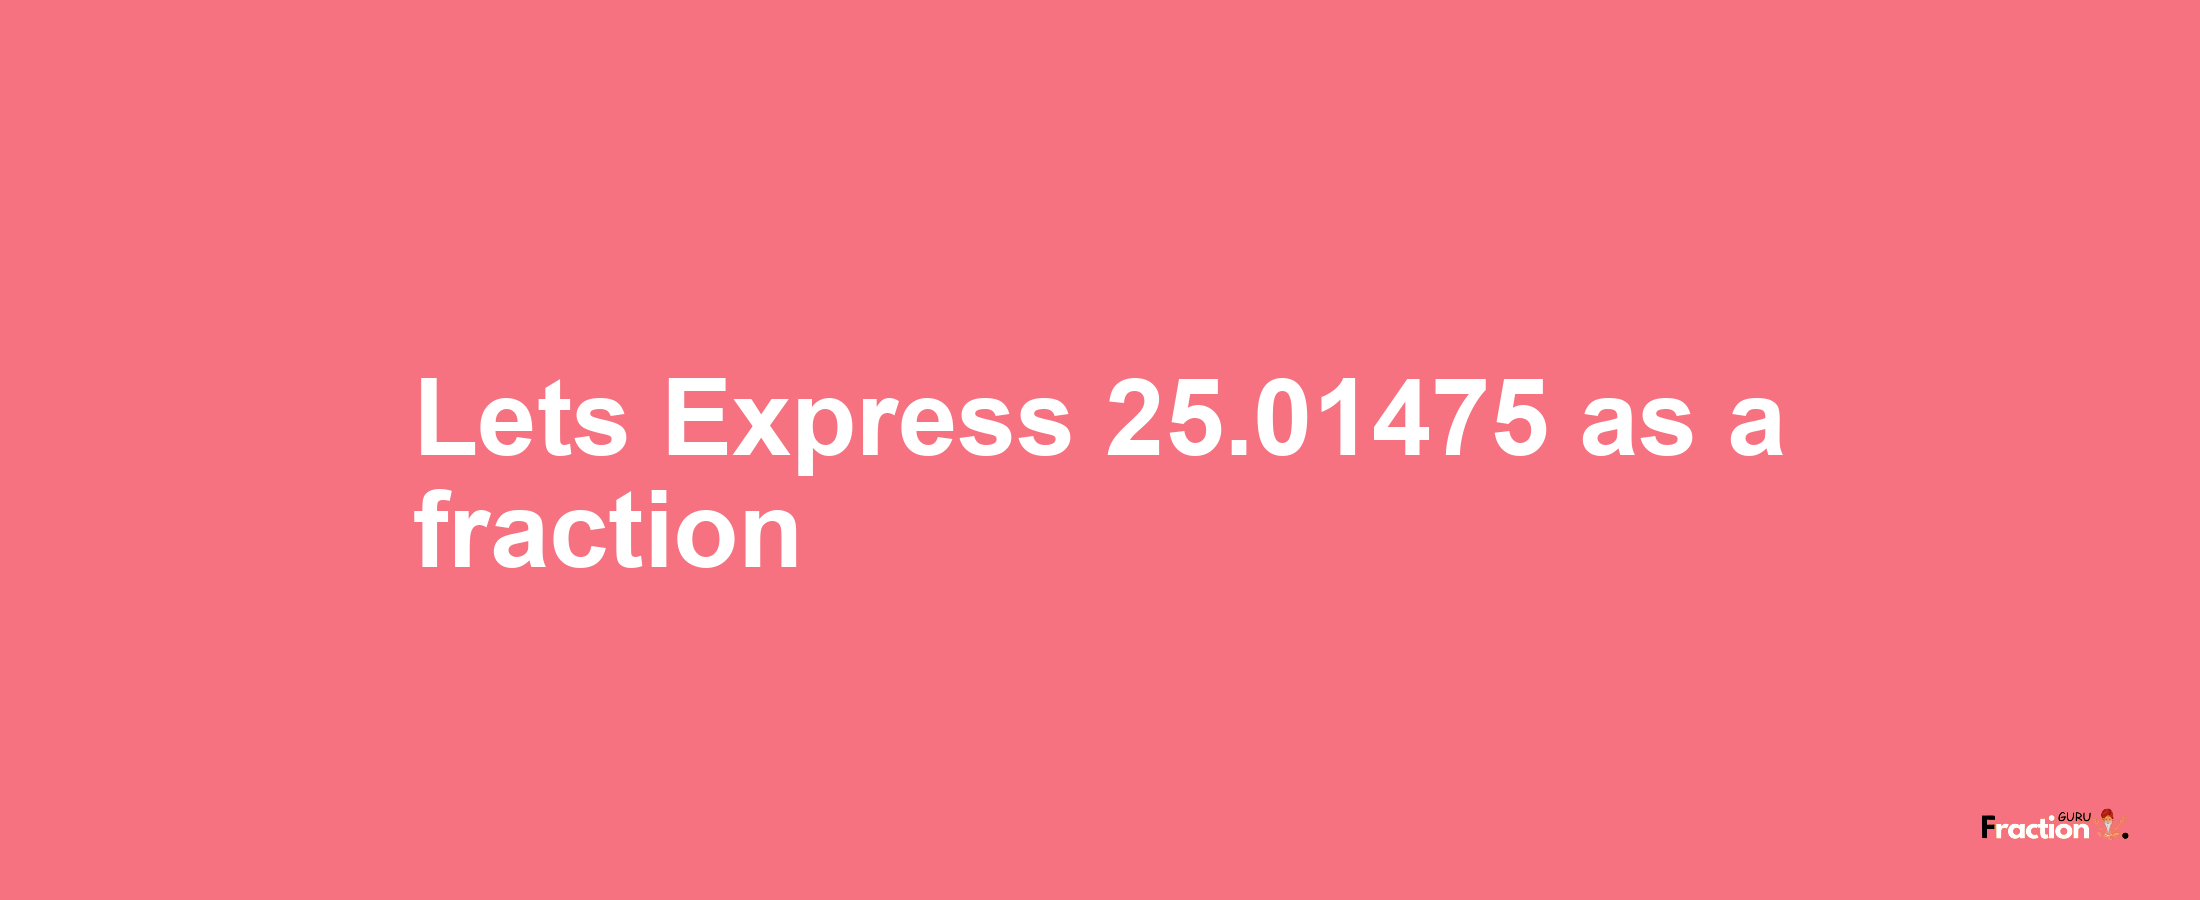 Lets Express 25.01475 as afraction